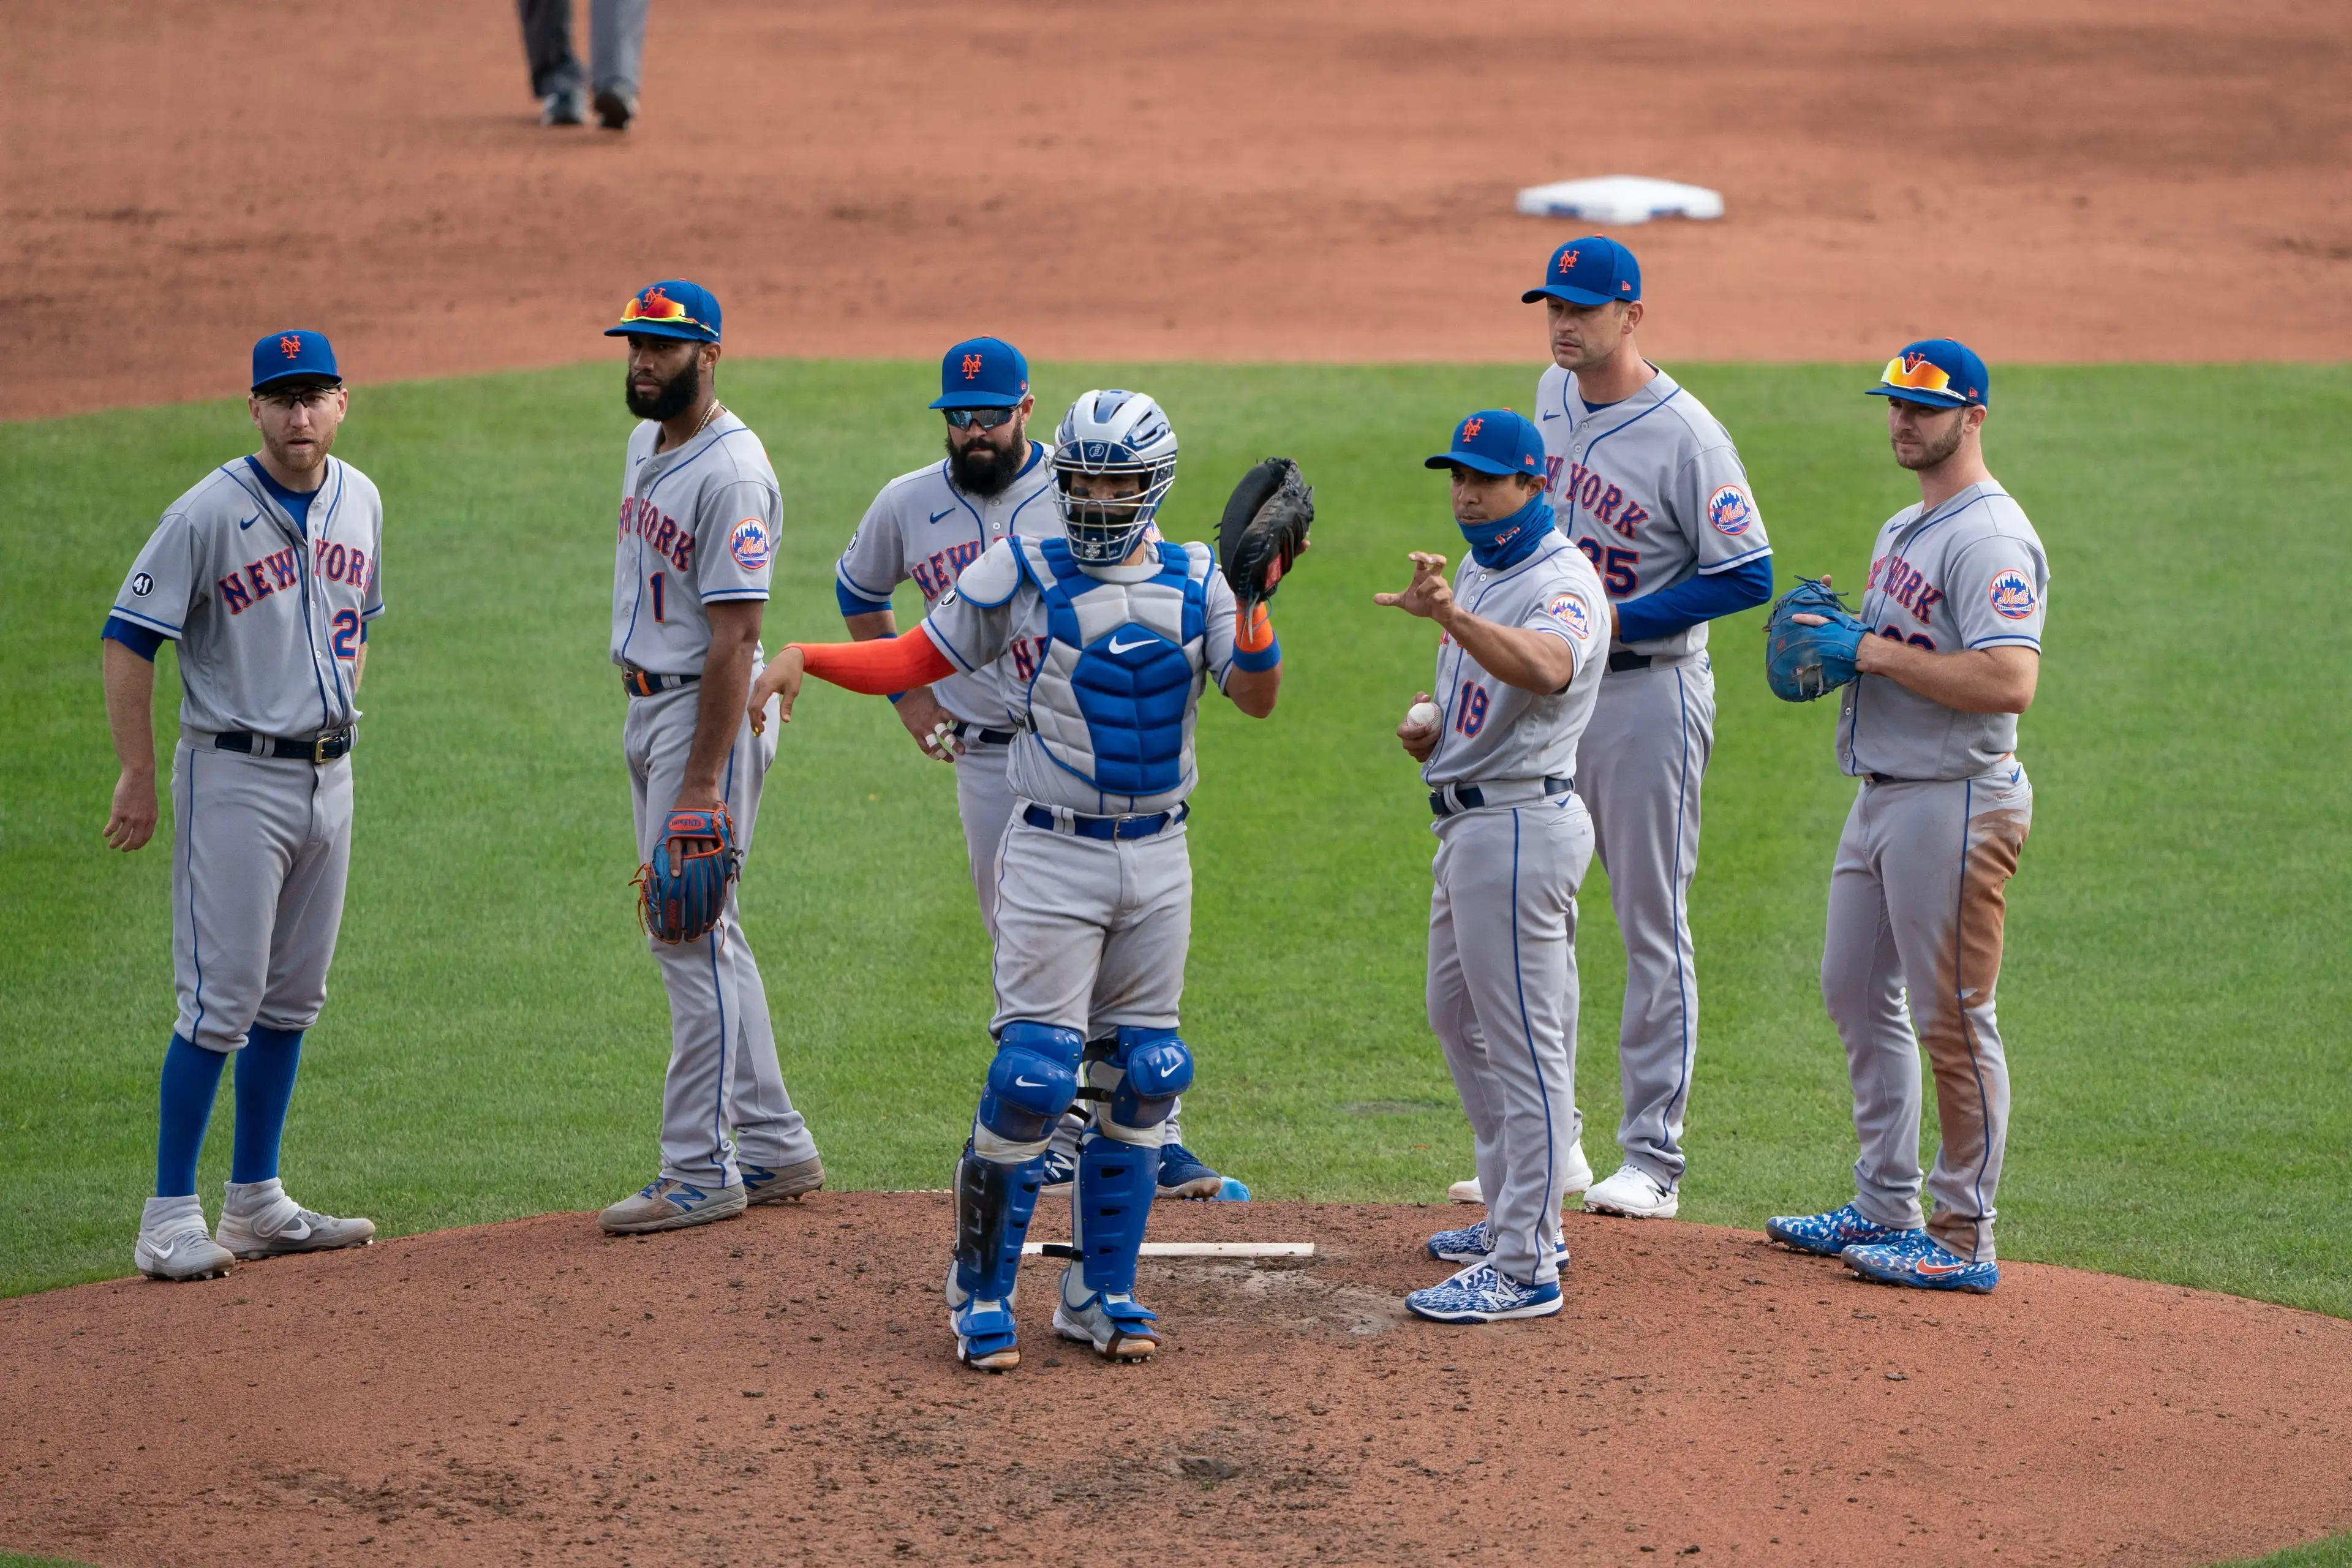 Luis Rojas and Mets players on the mound in Buffalo / USA Today